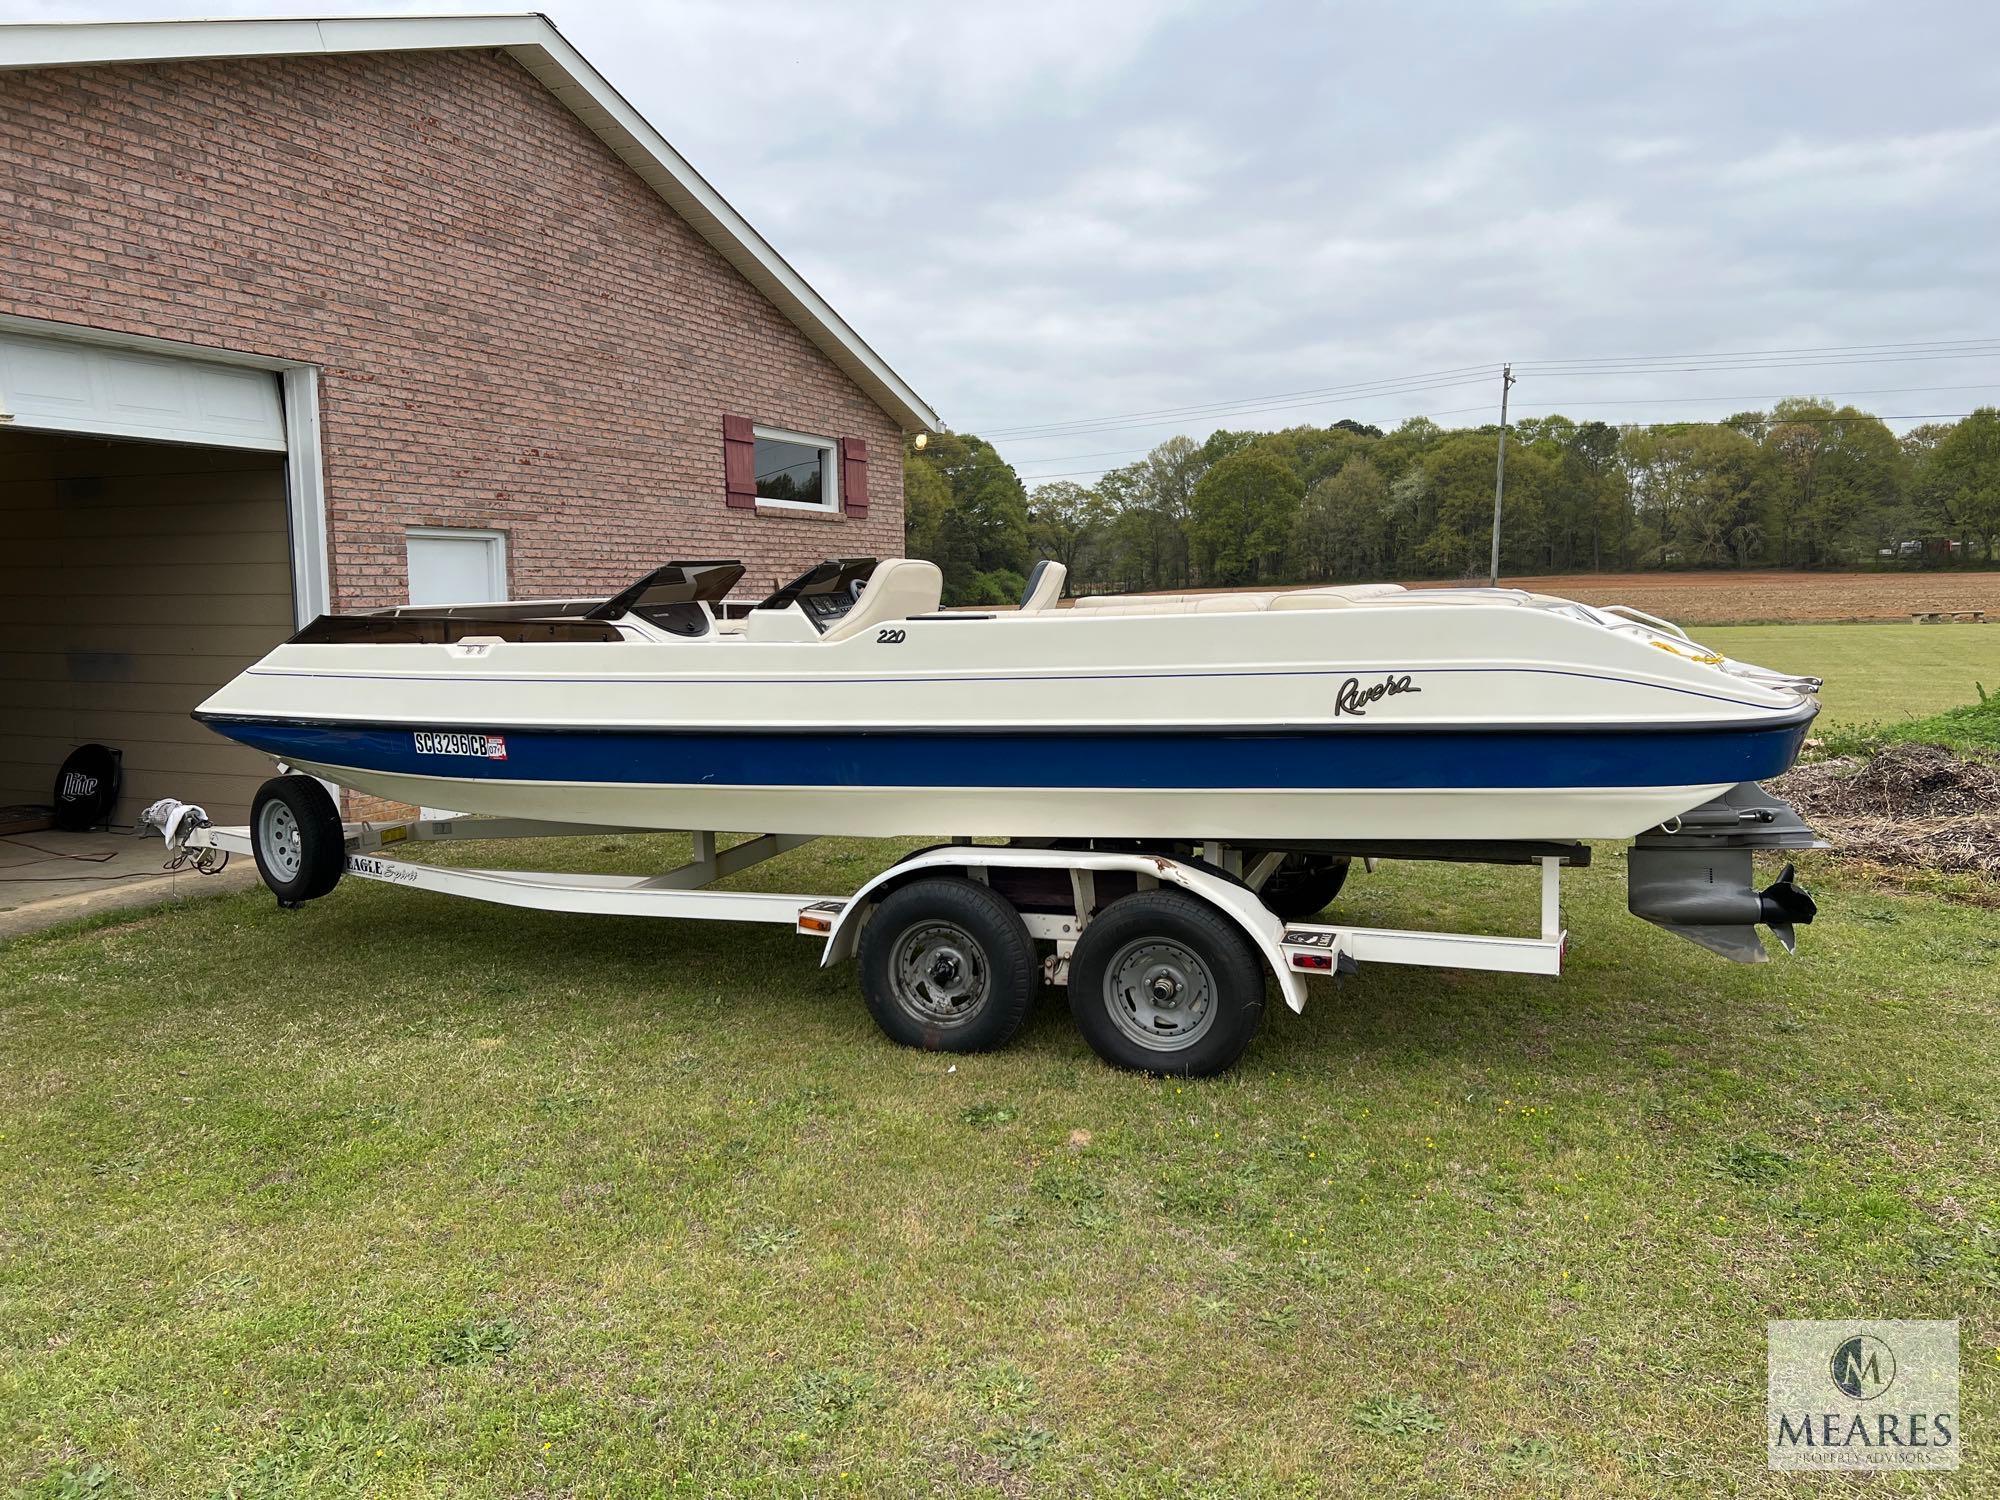 Rivera 220 Deck Boat with Volvo Penta 5.0L Inboard Motor and Trailer